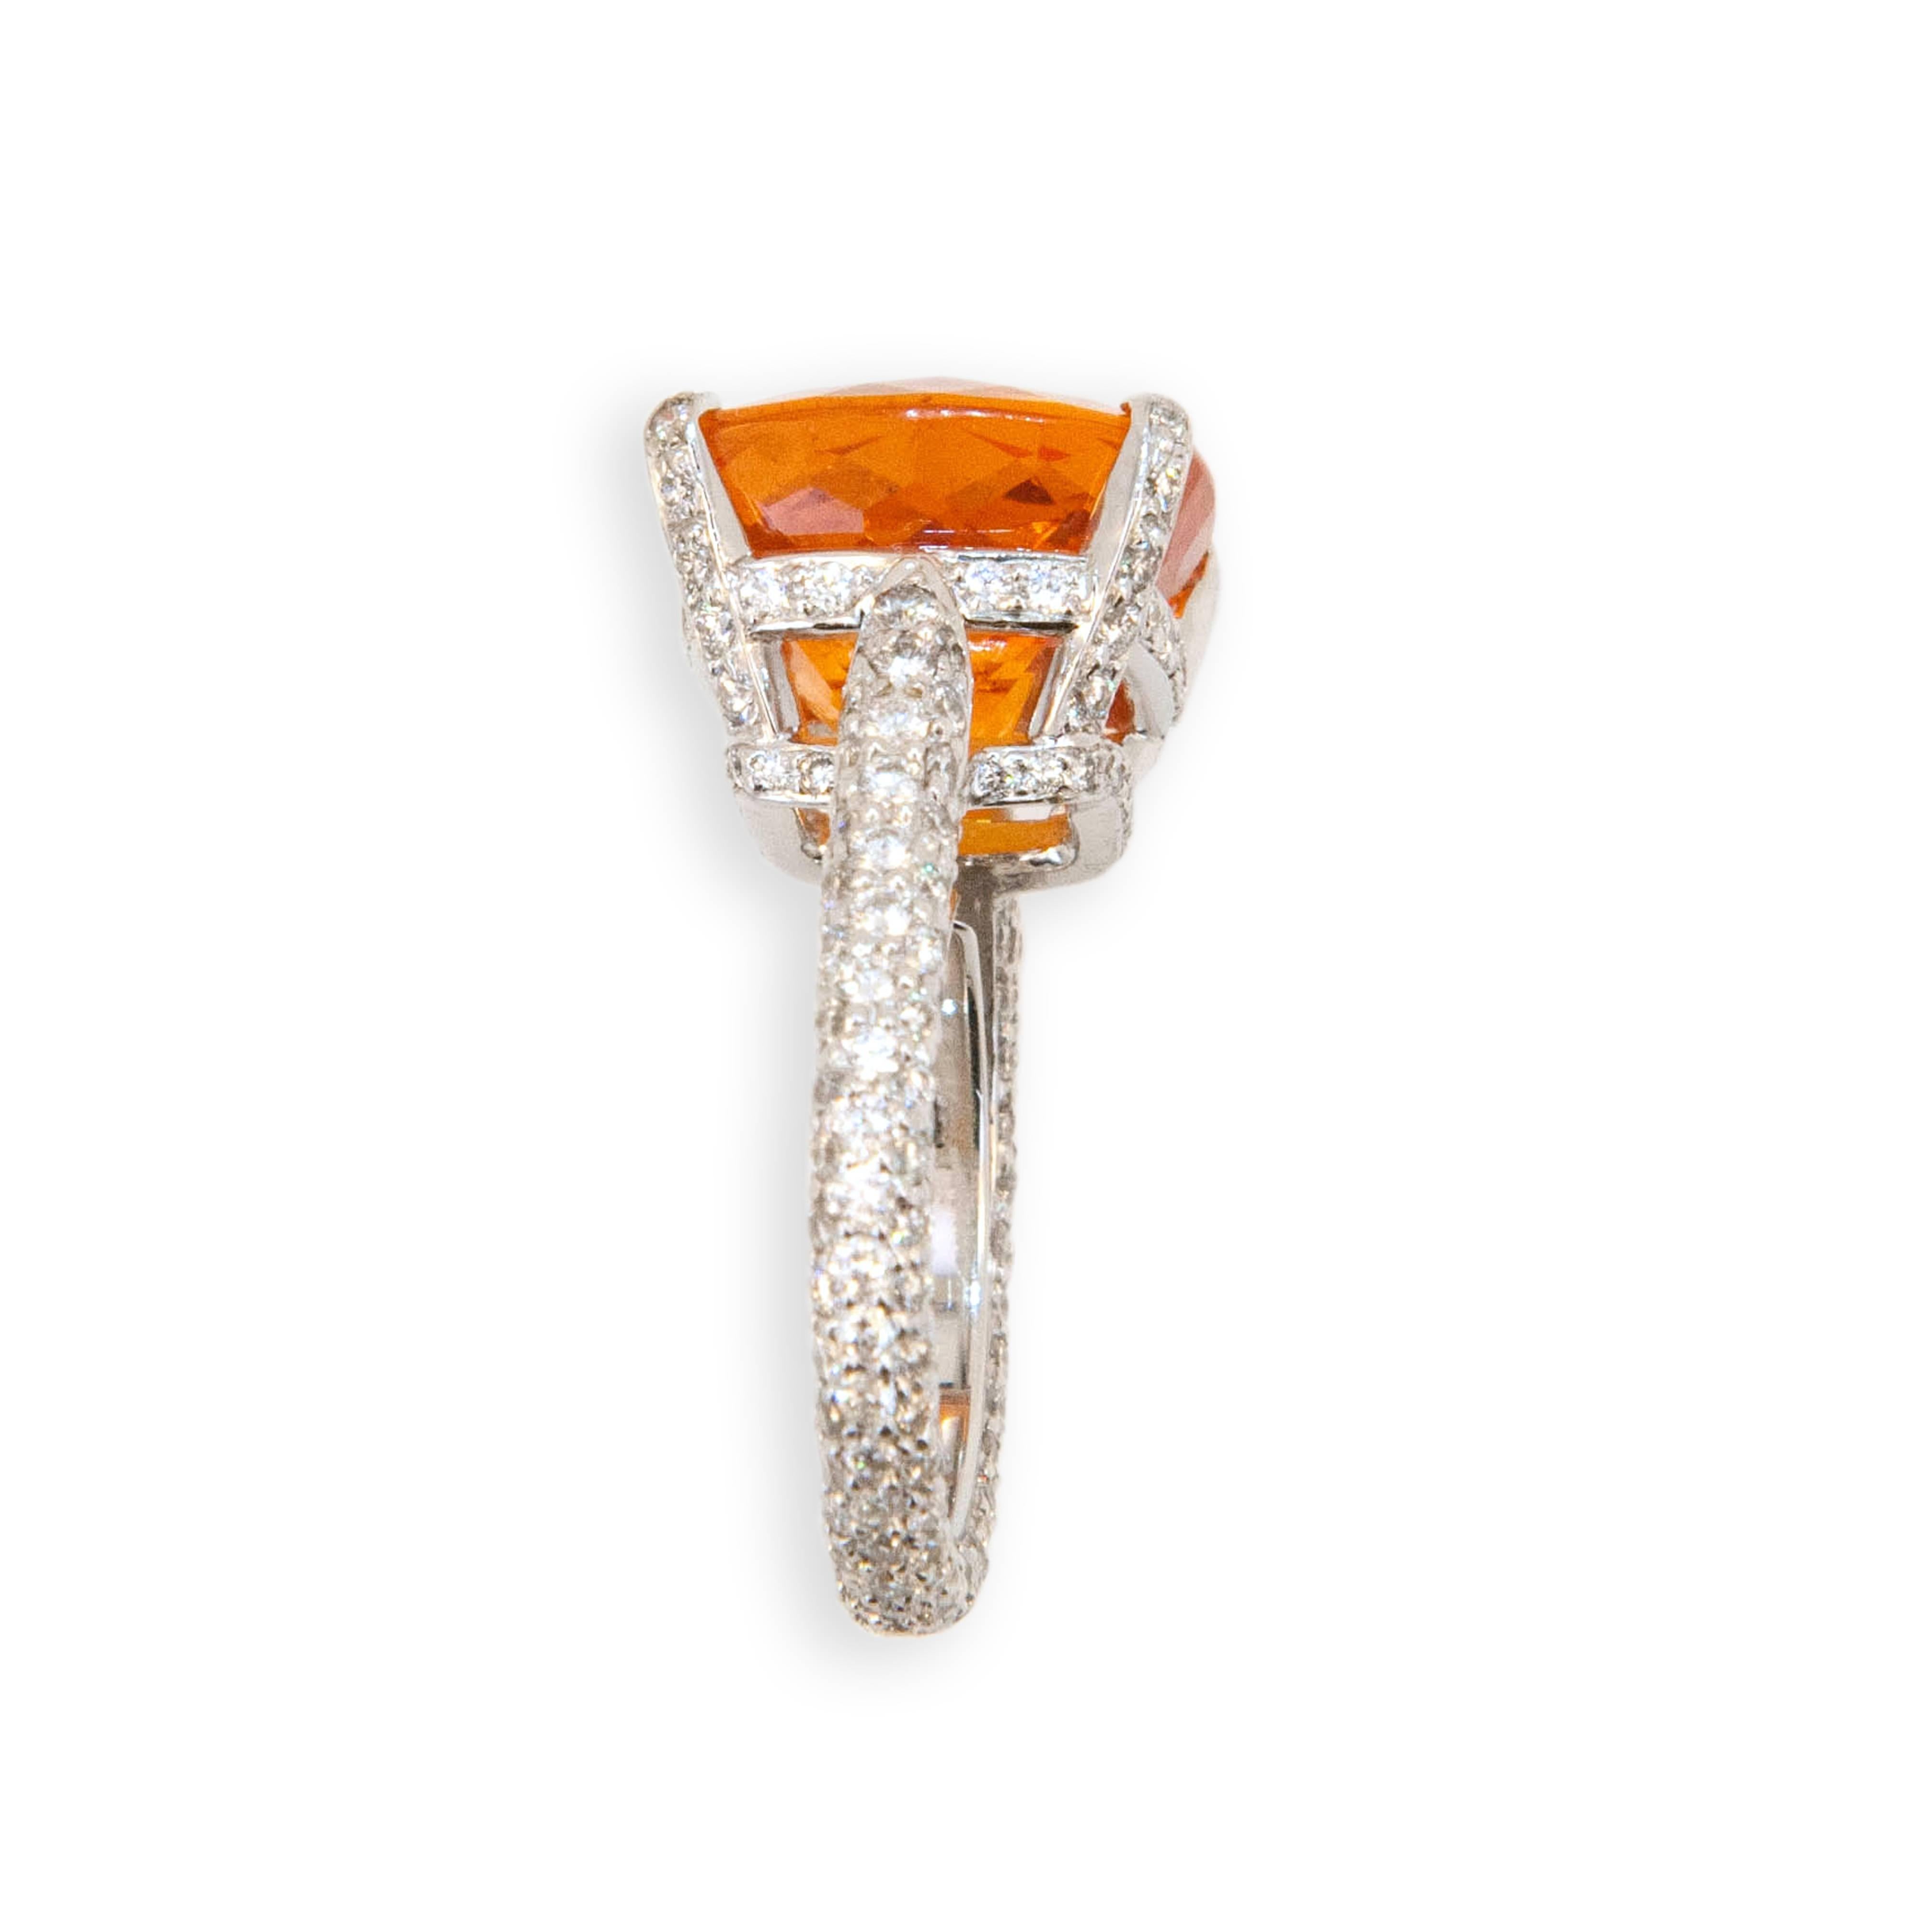 18 karat white gold ring set with one faceted cushion cut Mandarin Garnet 15.10 carats shank, under bezel and prongs are set with 234 round Diamonds 1.94 carats total weight. Ring is a size 6.25 with a horseshoe.